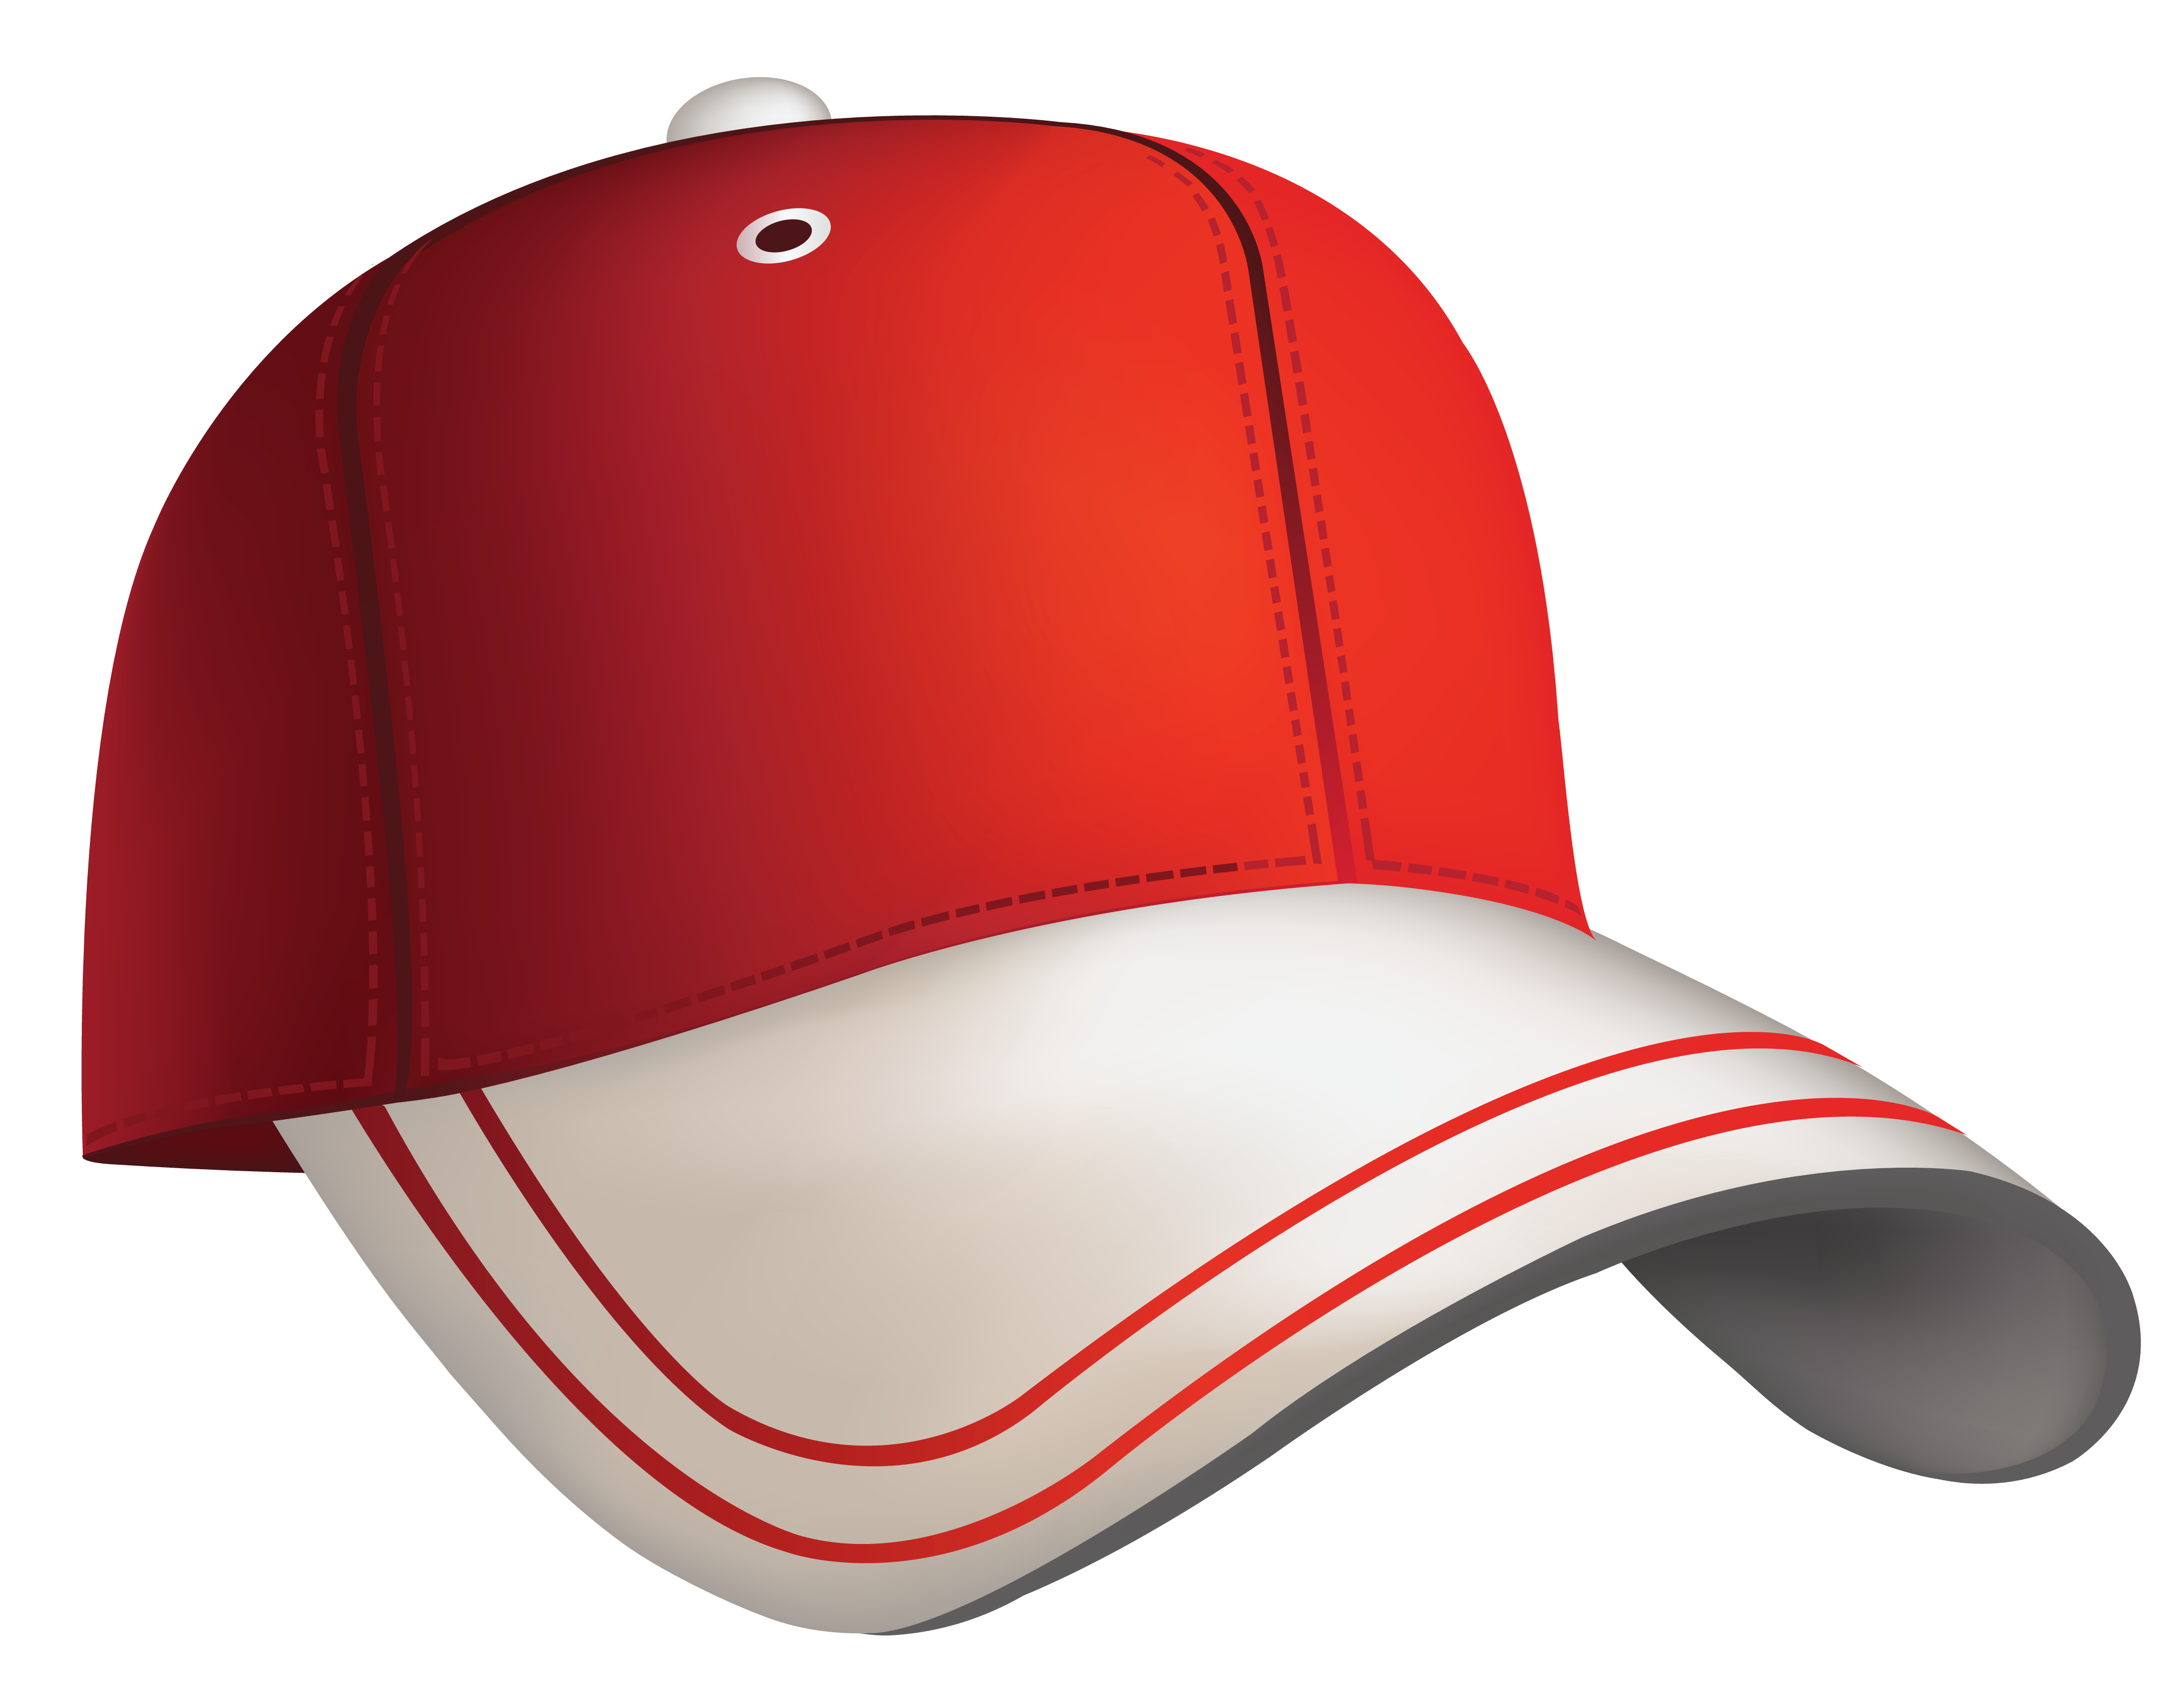 red hat clip art download free - photo #48